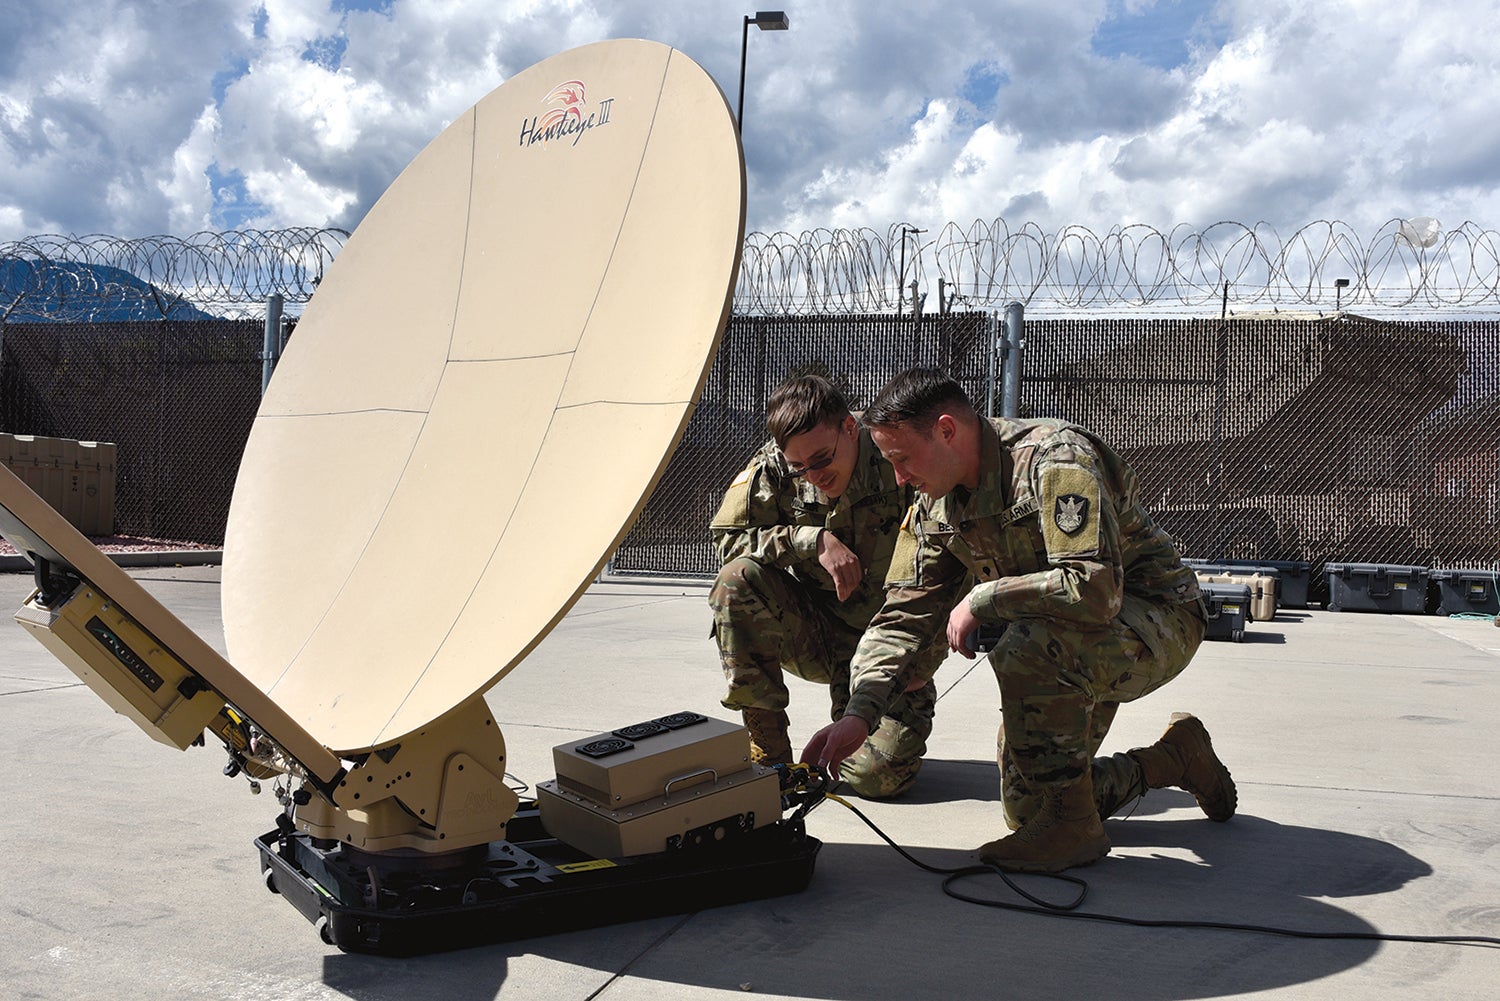 Spcs. Klay Walker, left, and Alexander Best with the 1st Space Battalion work with a 1.2-meter Hawkeye antenna at Fort Carson, Colorado. (Credit: U.S. Army/Dottie White)